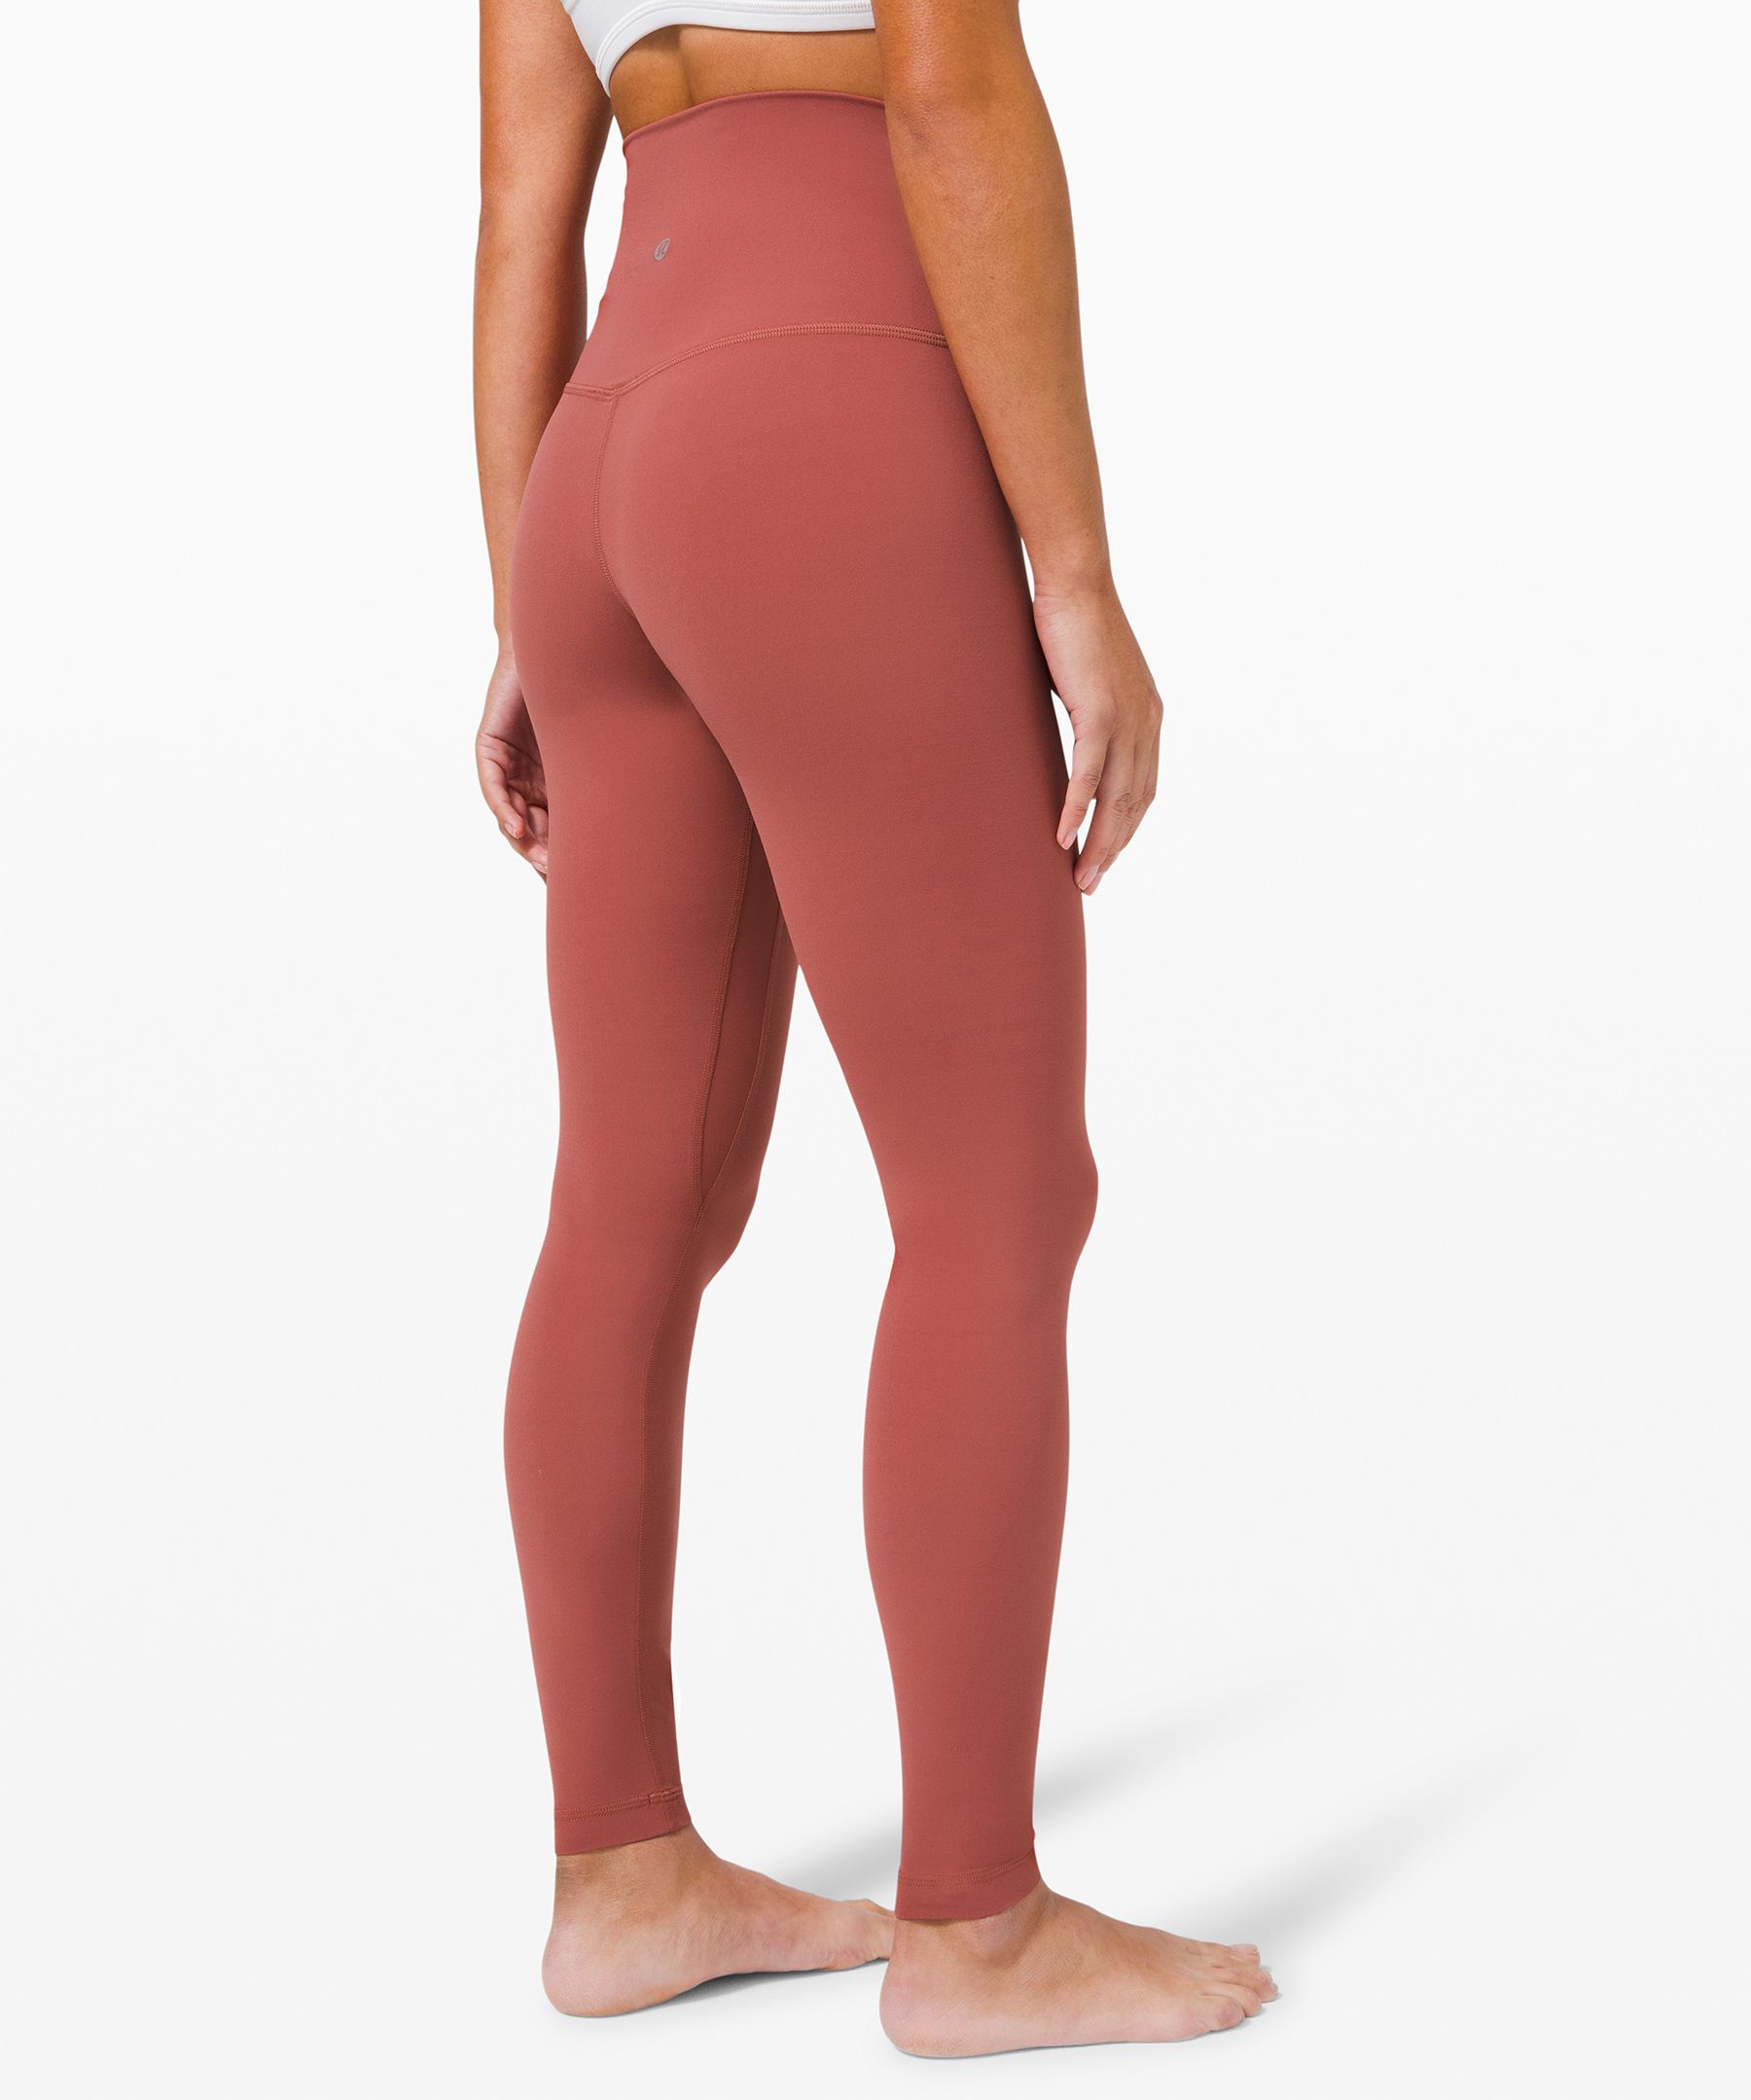 lululemon Align™ High-Rise Pant 24 *Asia Fit, Smoky Red